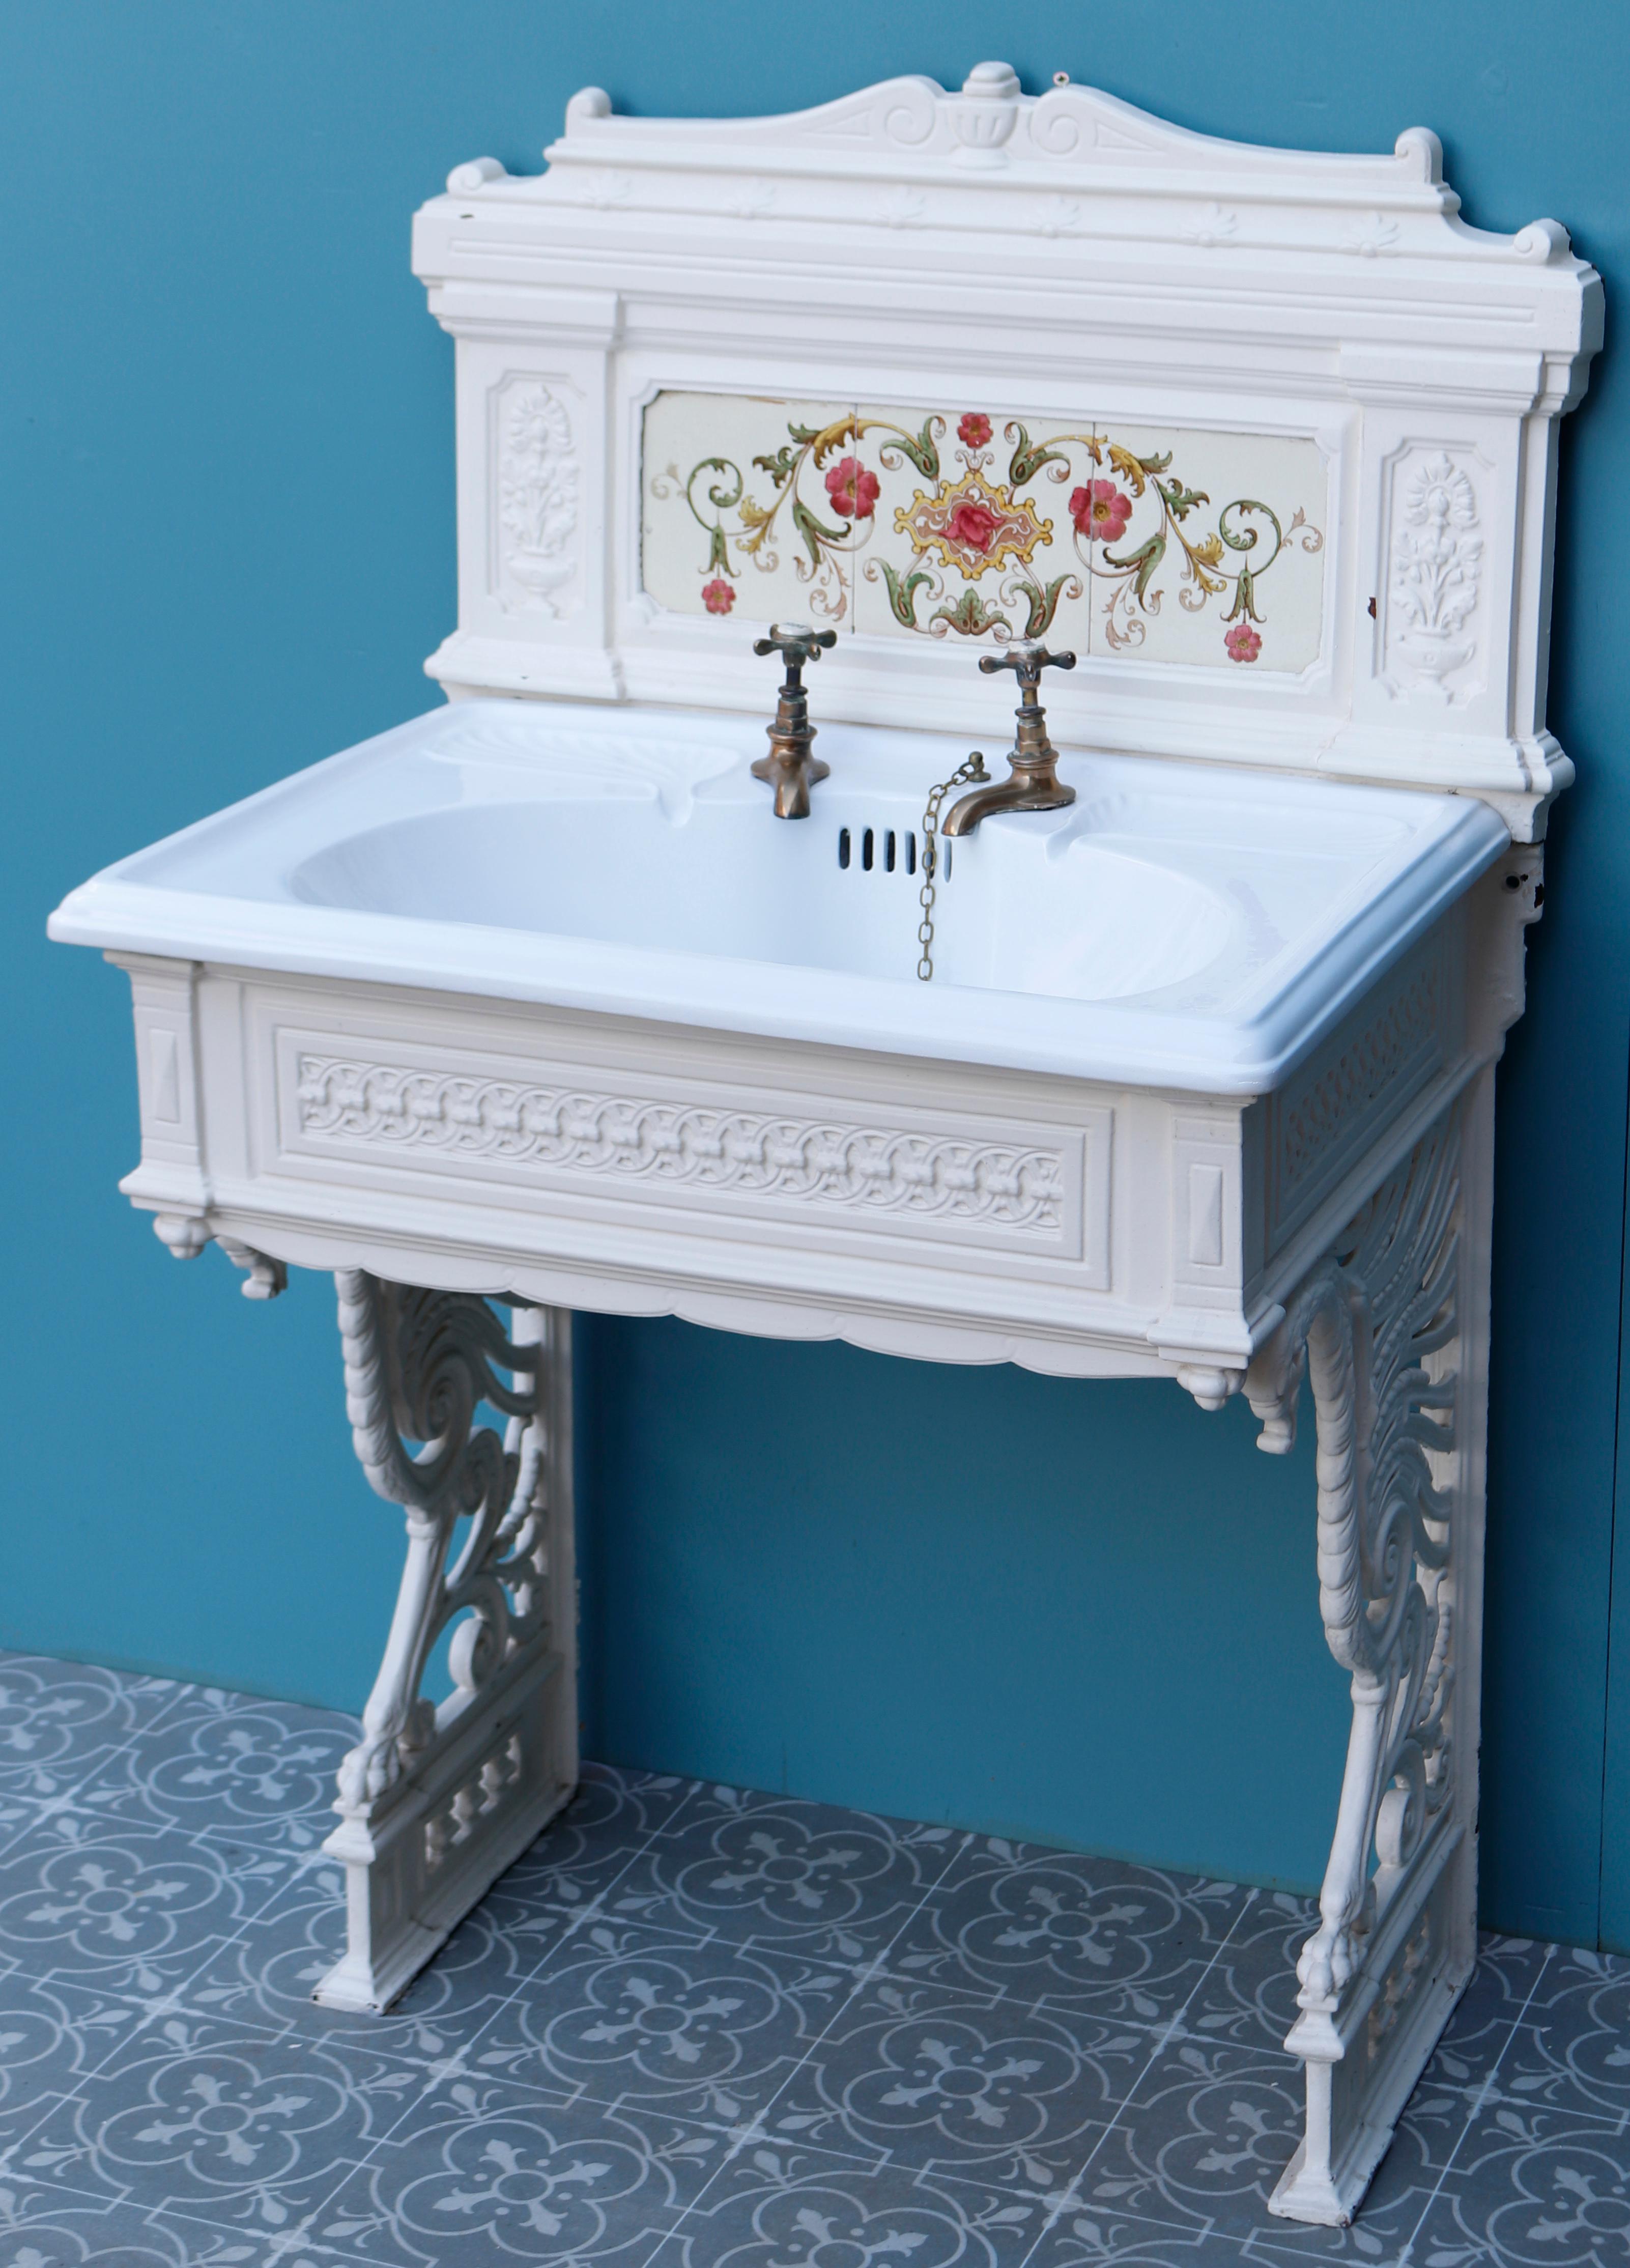 An attractive Victorian style wash stand with tiled cast iron splash back, cast iron stand and porcelain bowl. The sink includes the original taps, plugs, chains and waste. The tiles are original.

We have another identical set